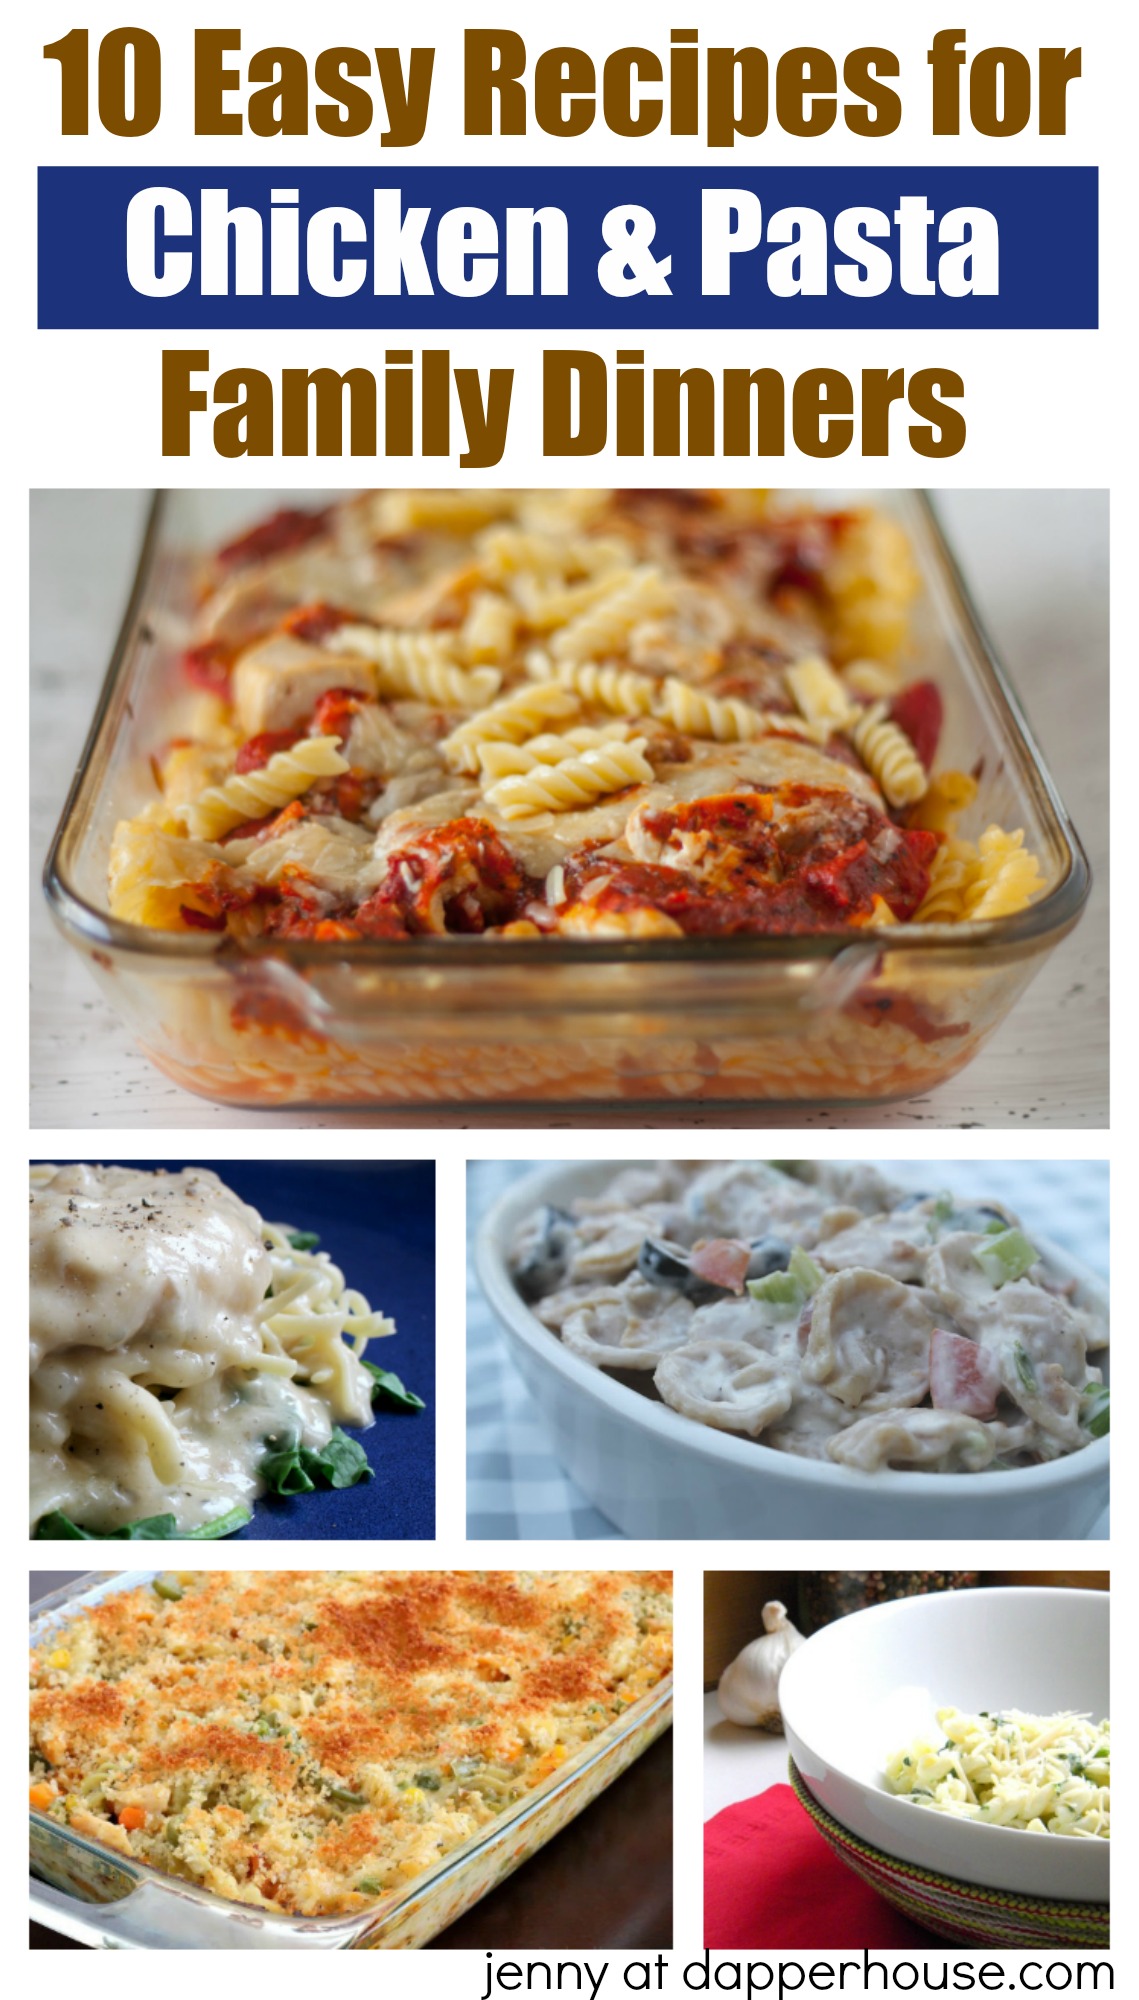 10 Easy Chicken & Pasta Dishes for Family Dinner – Jenny at dapperhouse